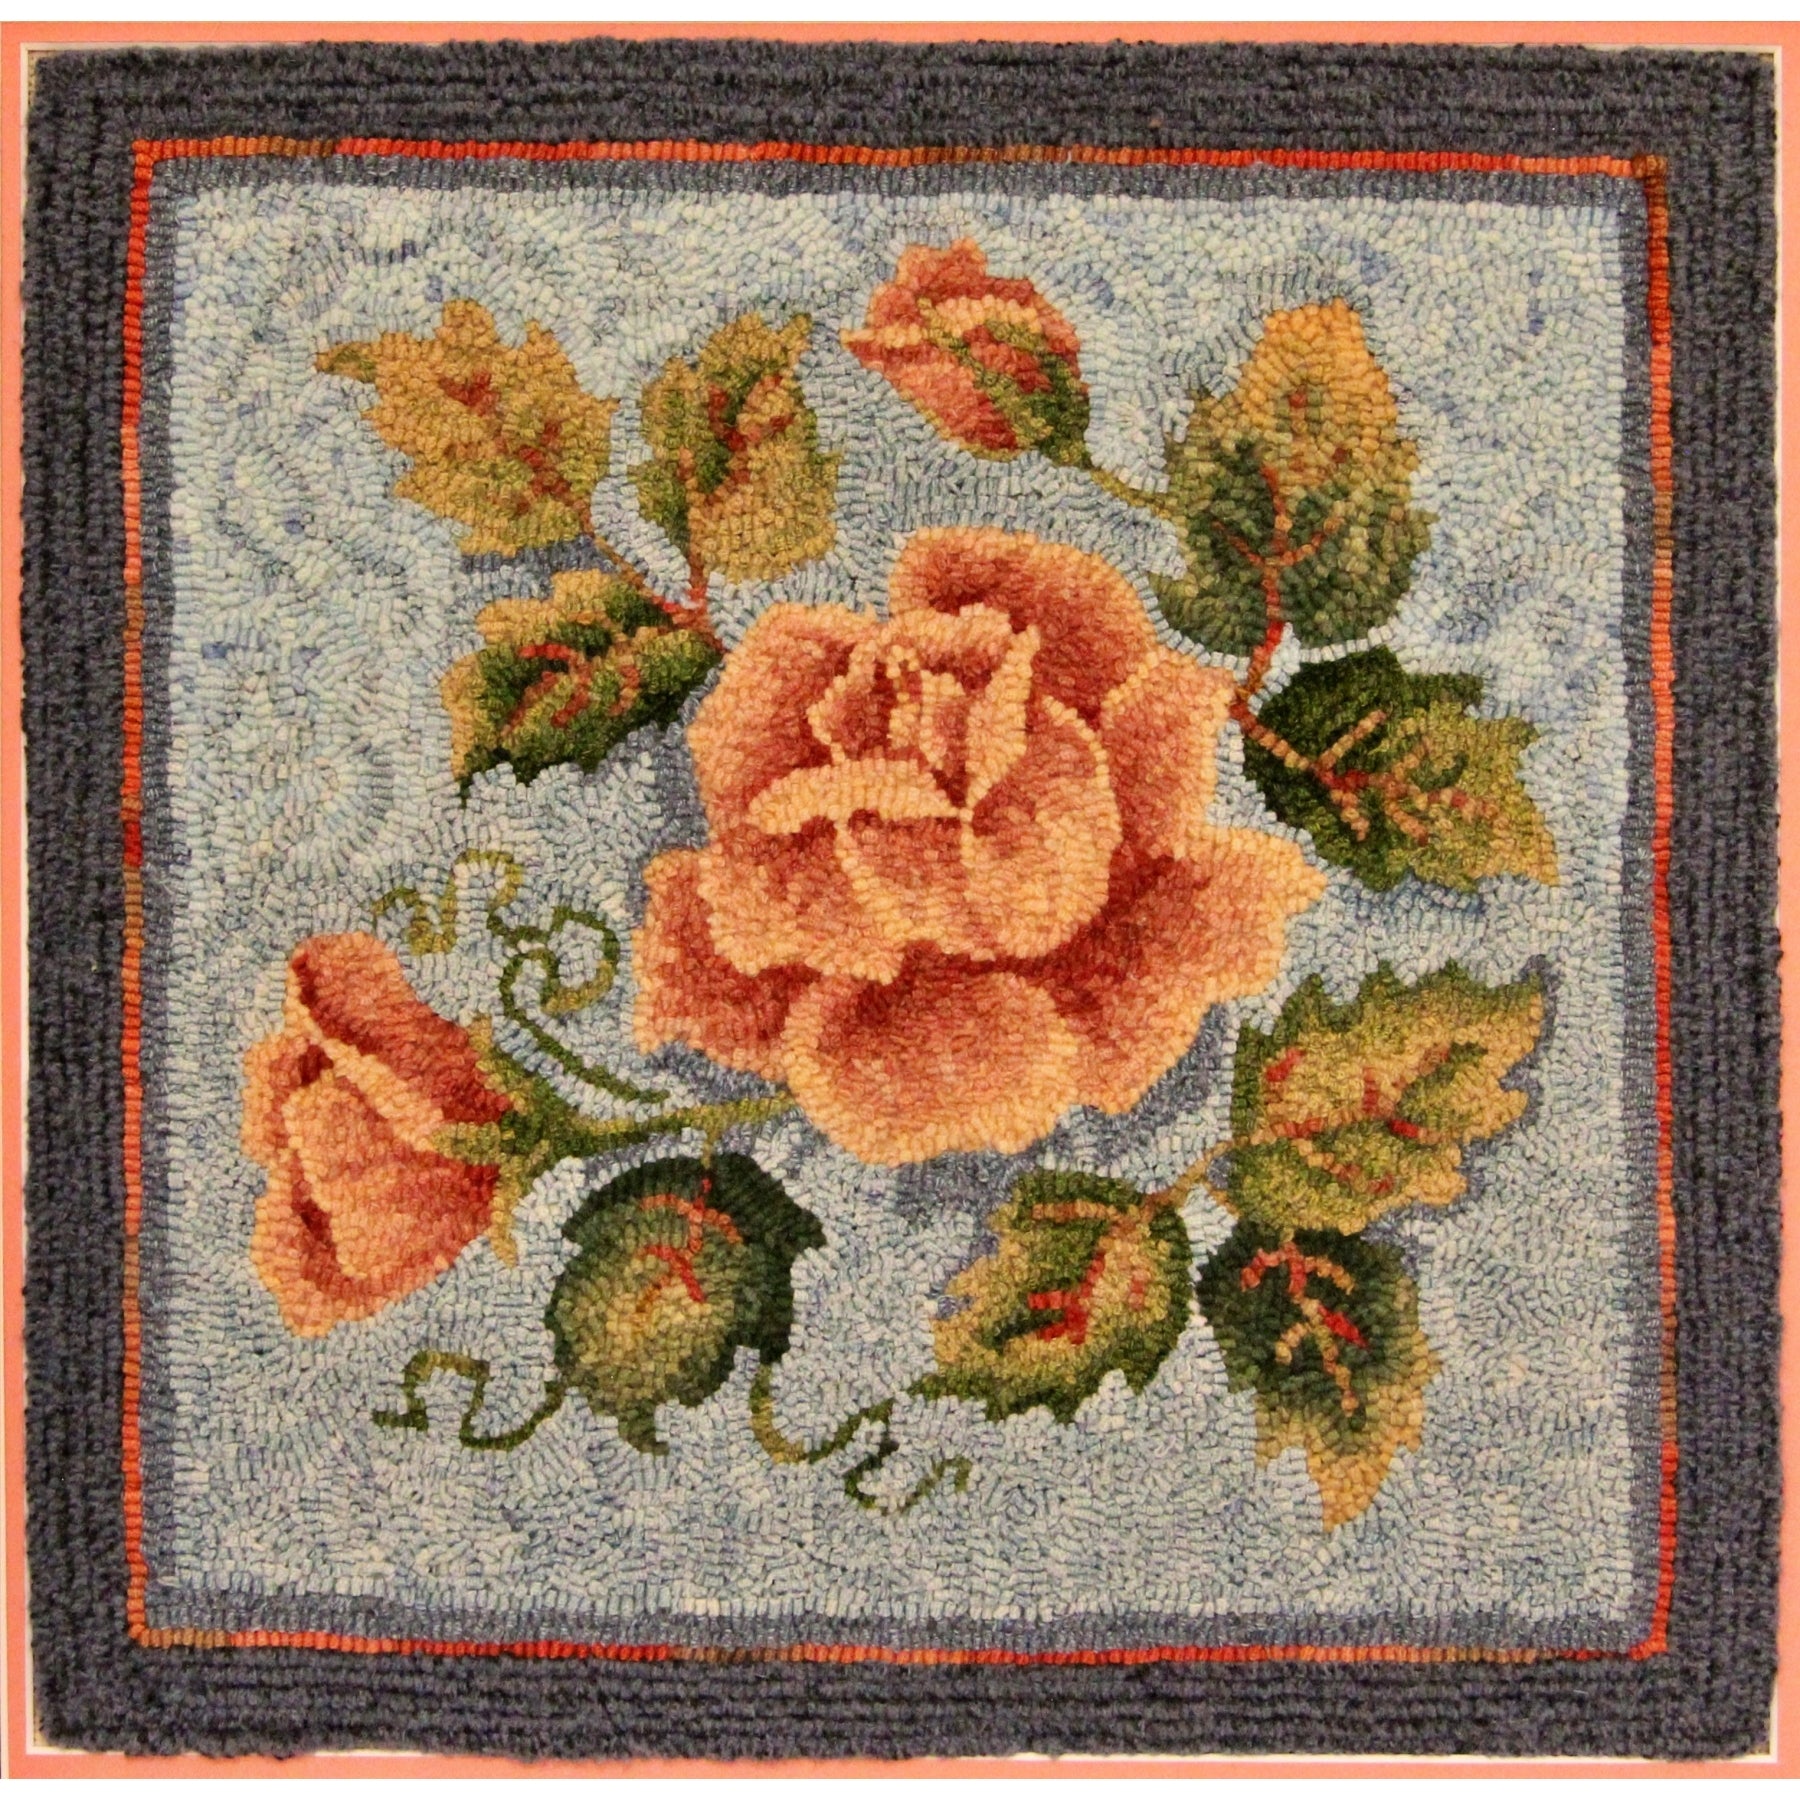 Marie, rug hooked by Donna Allen